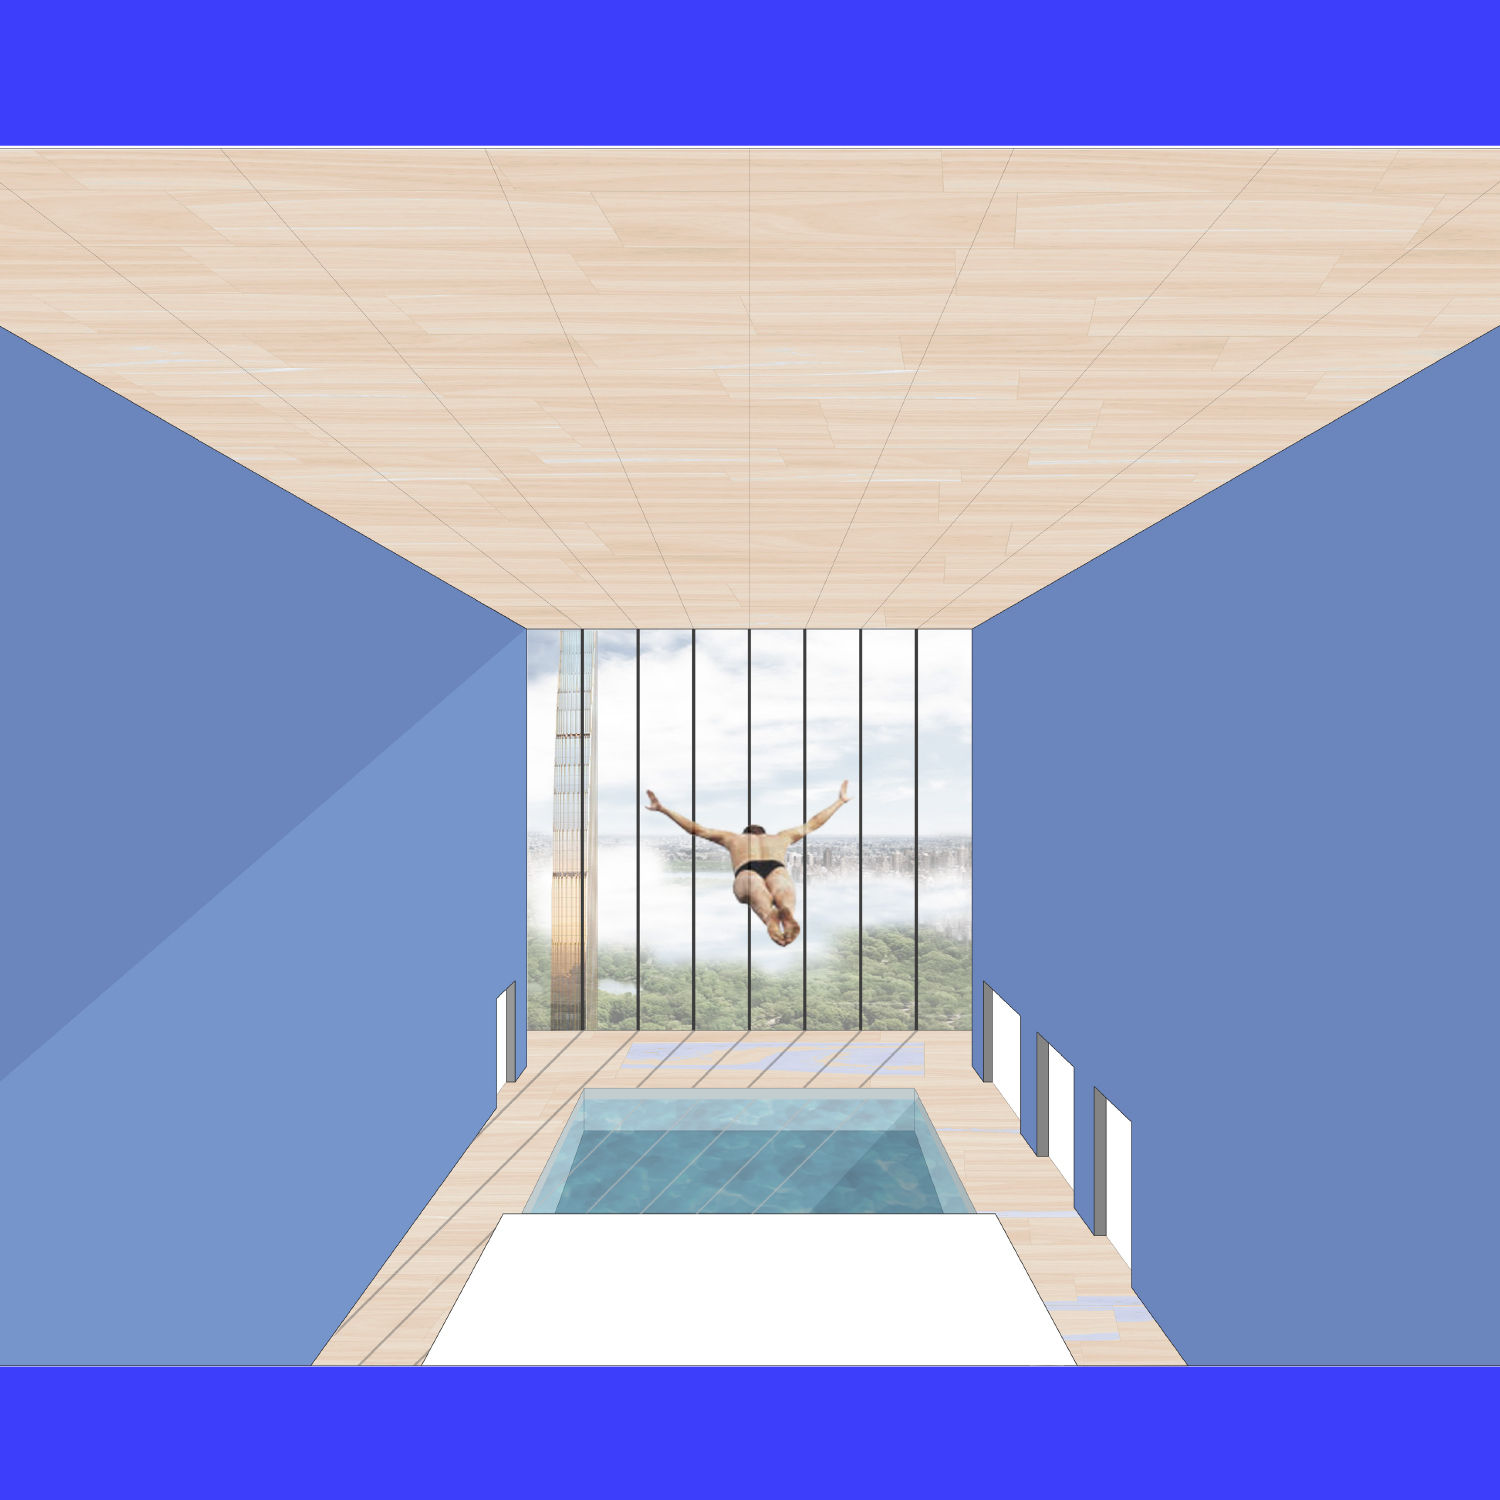 Render of man jumping into an indoor pool in a modern-style room.